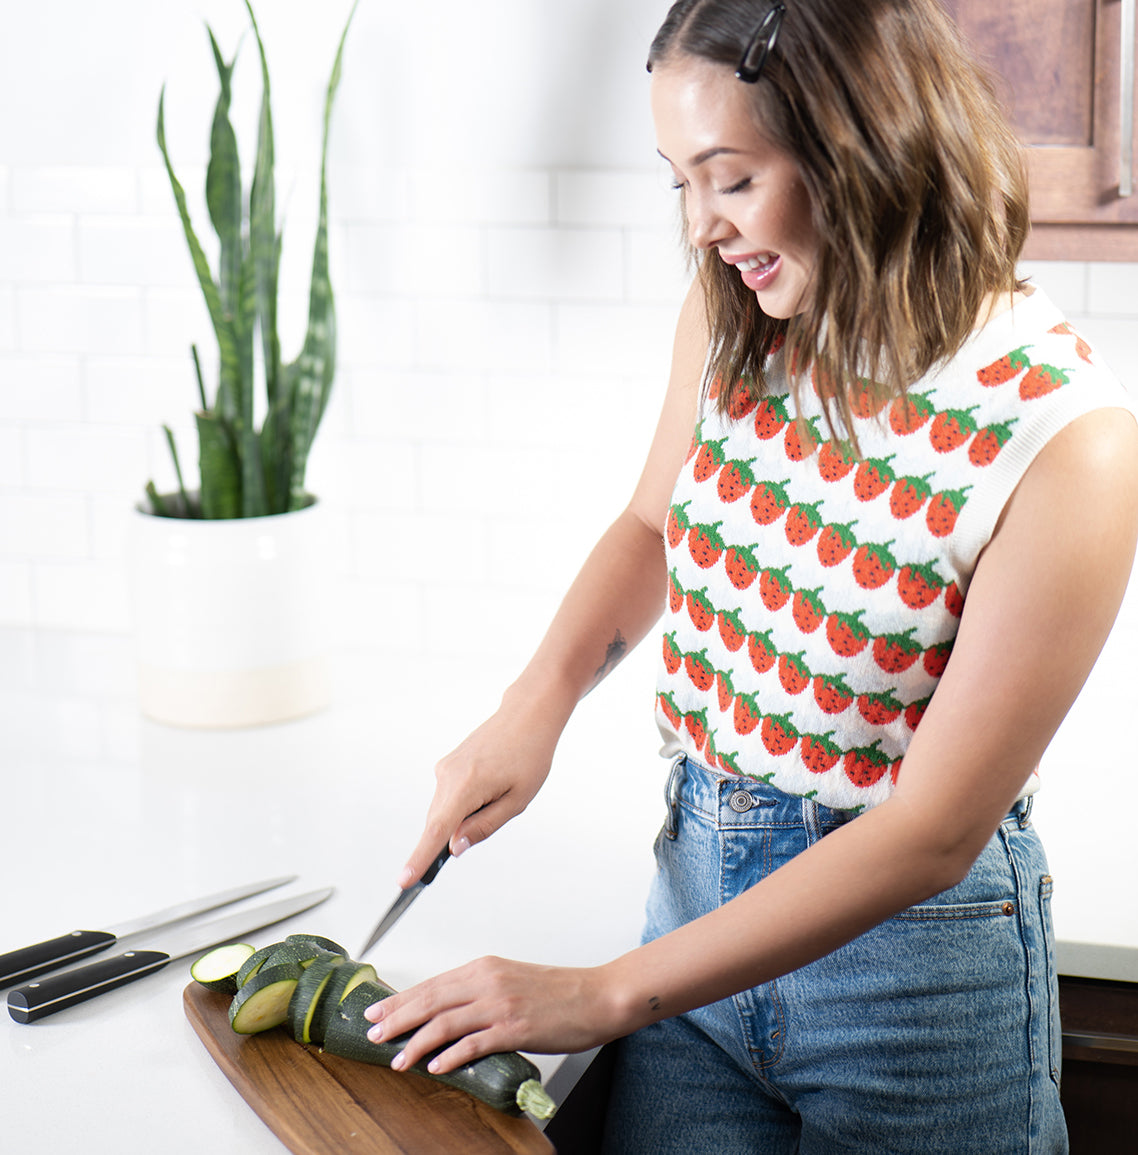 Lifestyle shot showing woman cutting with Brandless knives